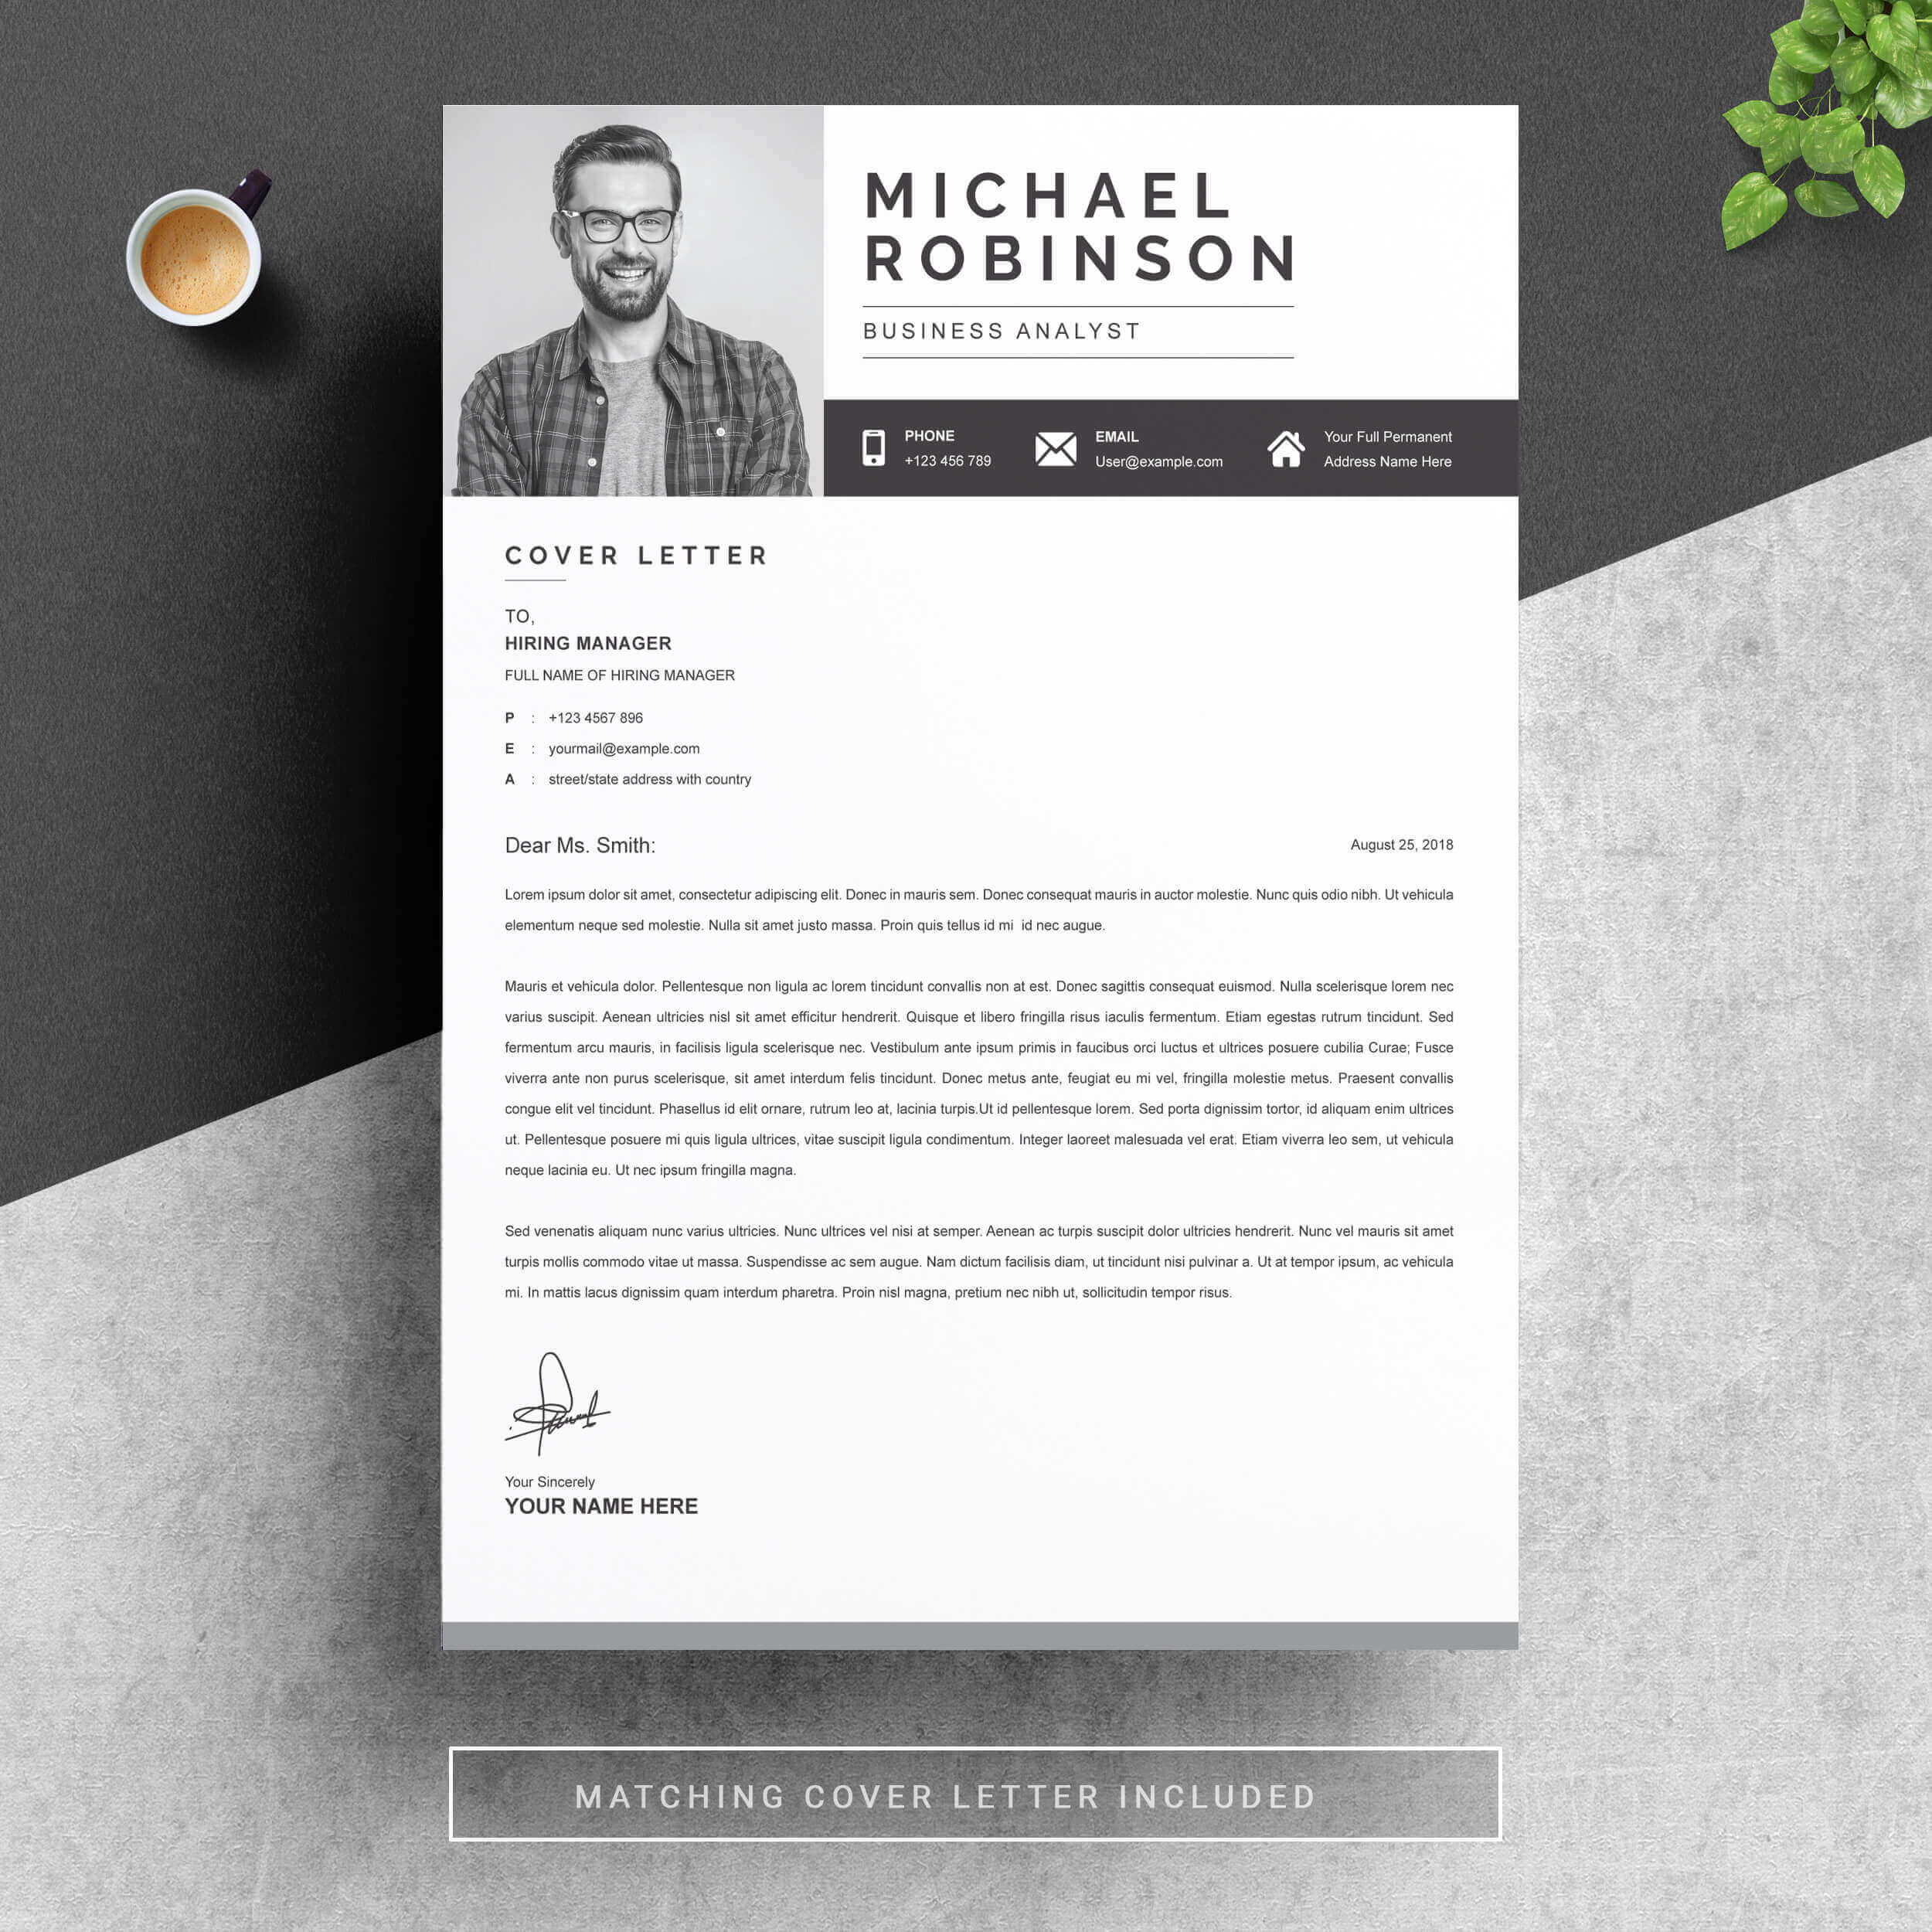 03 resume cover letter page free resume design template 4 1 1 407